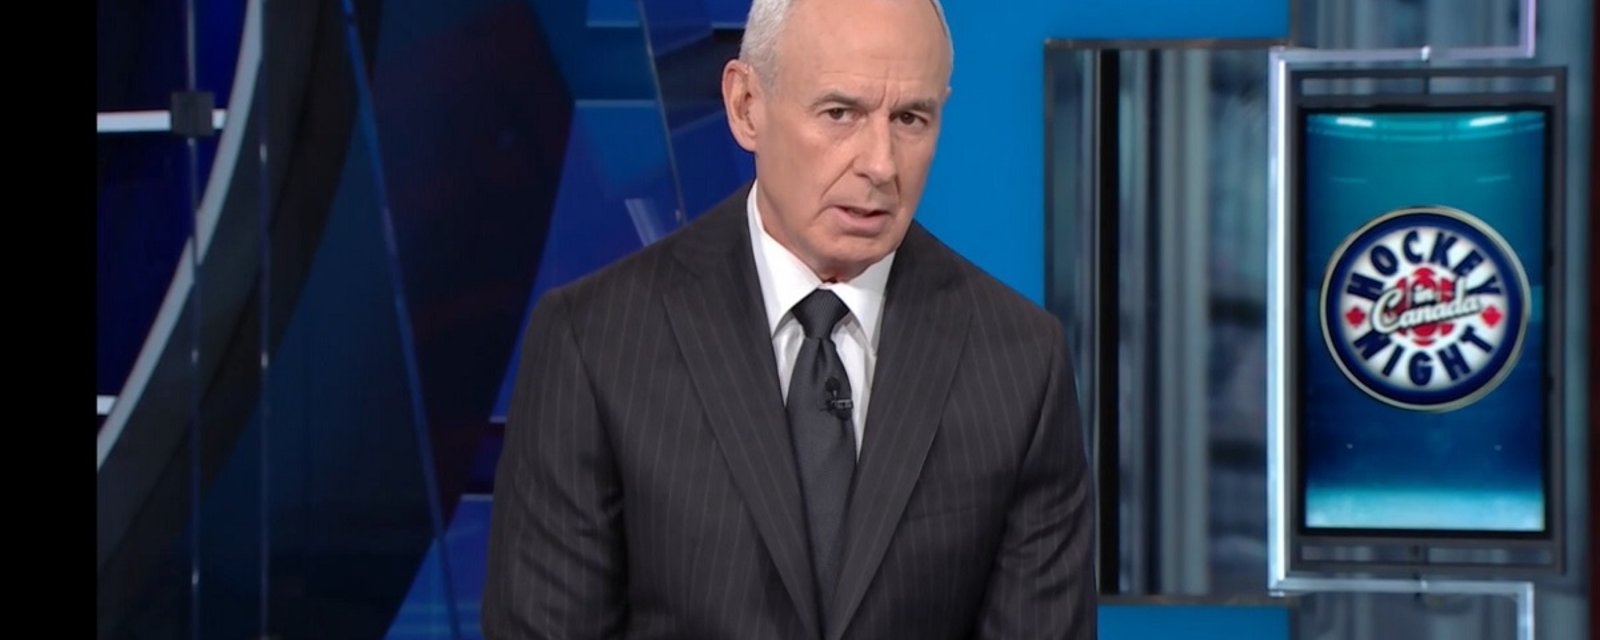 Ron MacLean roasted over awkward interview on Saturday night.